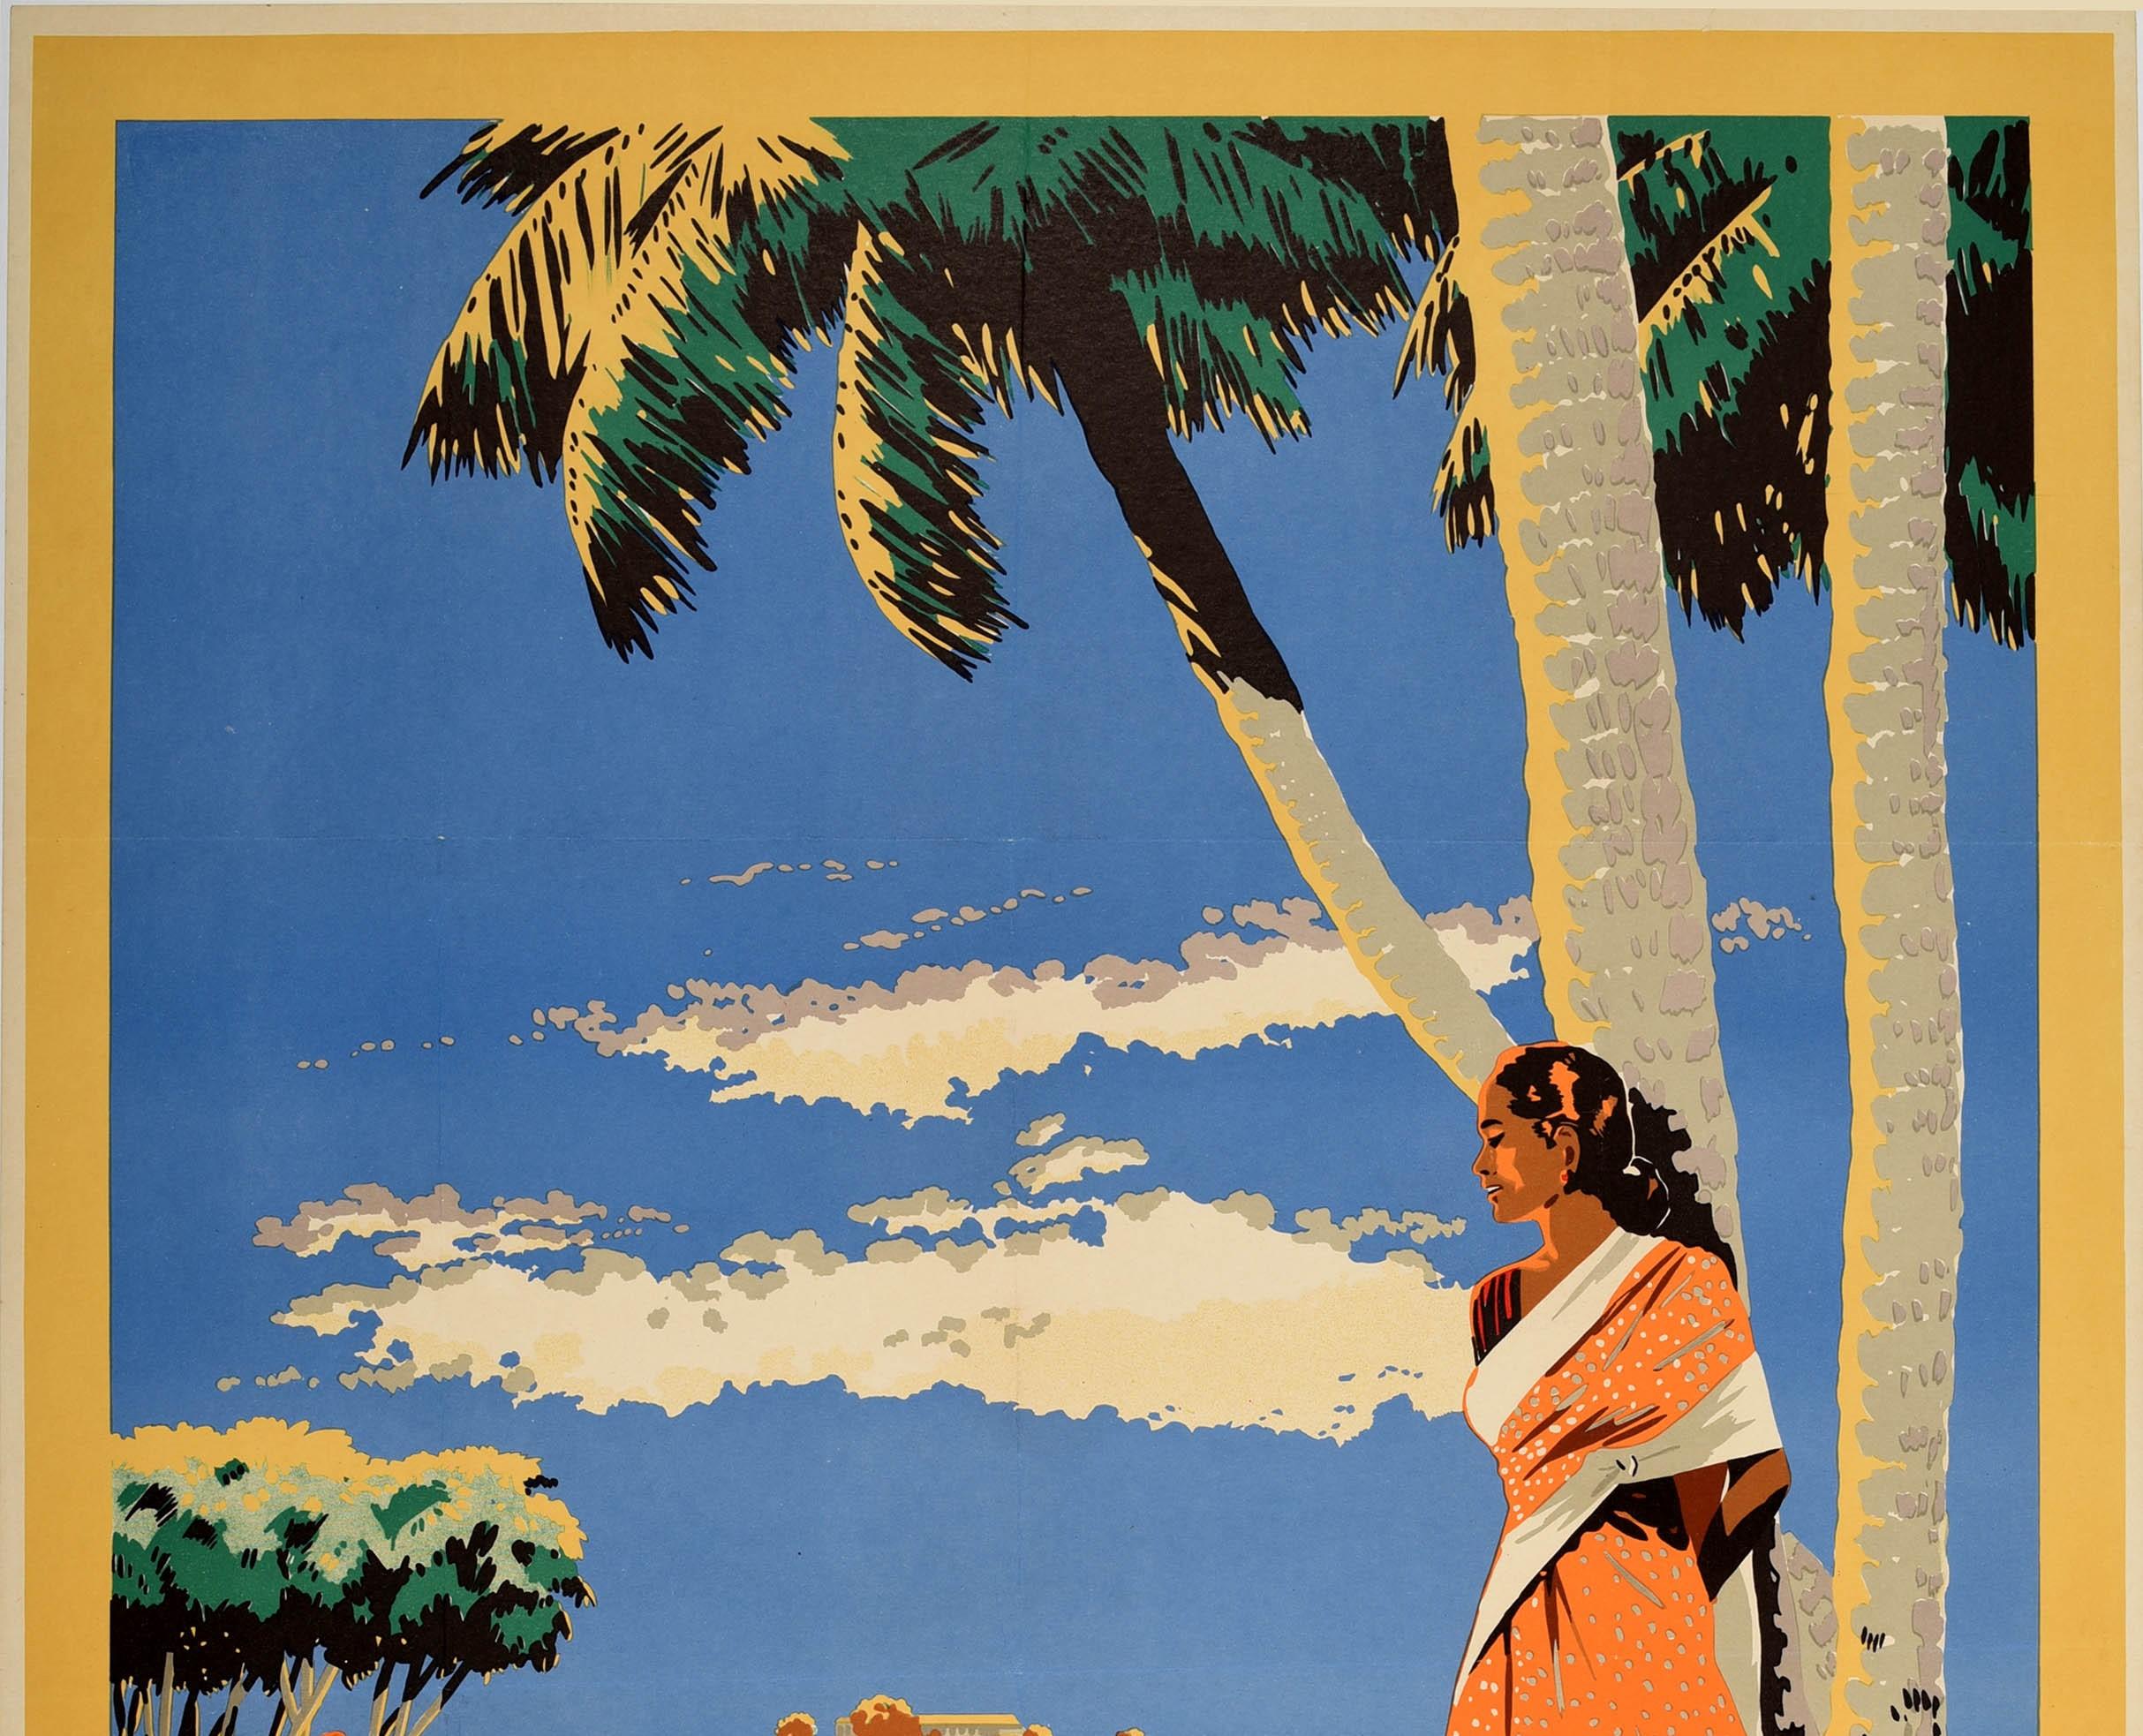 Original vintage travel poster promoting Ceylon featuring a great illustration showing a lady in a traditional sari dress leaning against a palm tree on a sandy beach with people on holiday sunbathing and relaxing and swimming in the sea and two